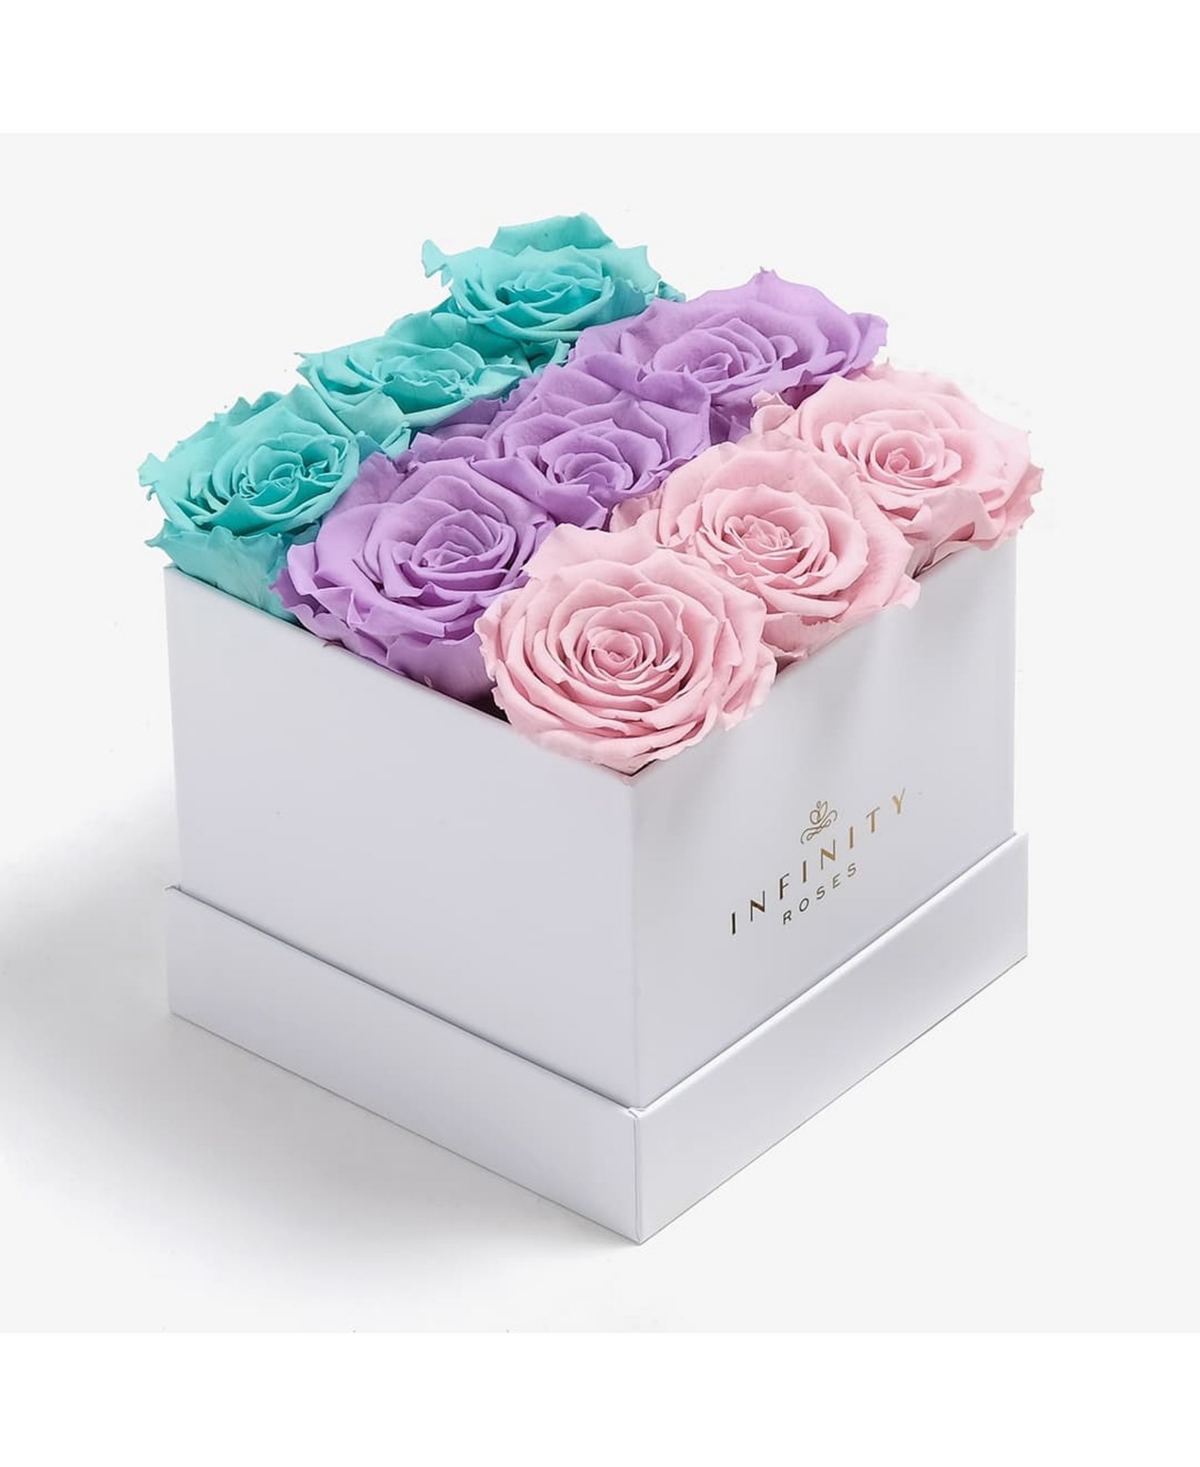 Square Box of 9 Blue Ombre Real Roses Preserved To Last Over A Year - Multi